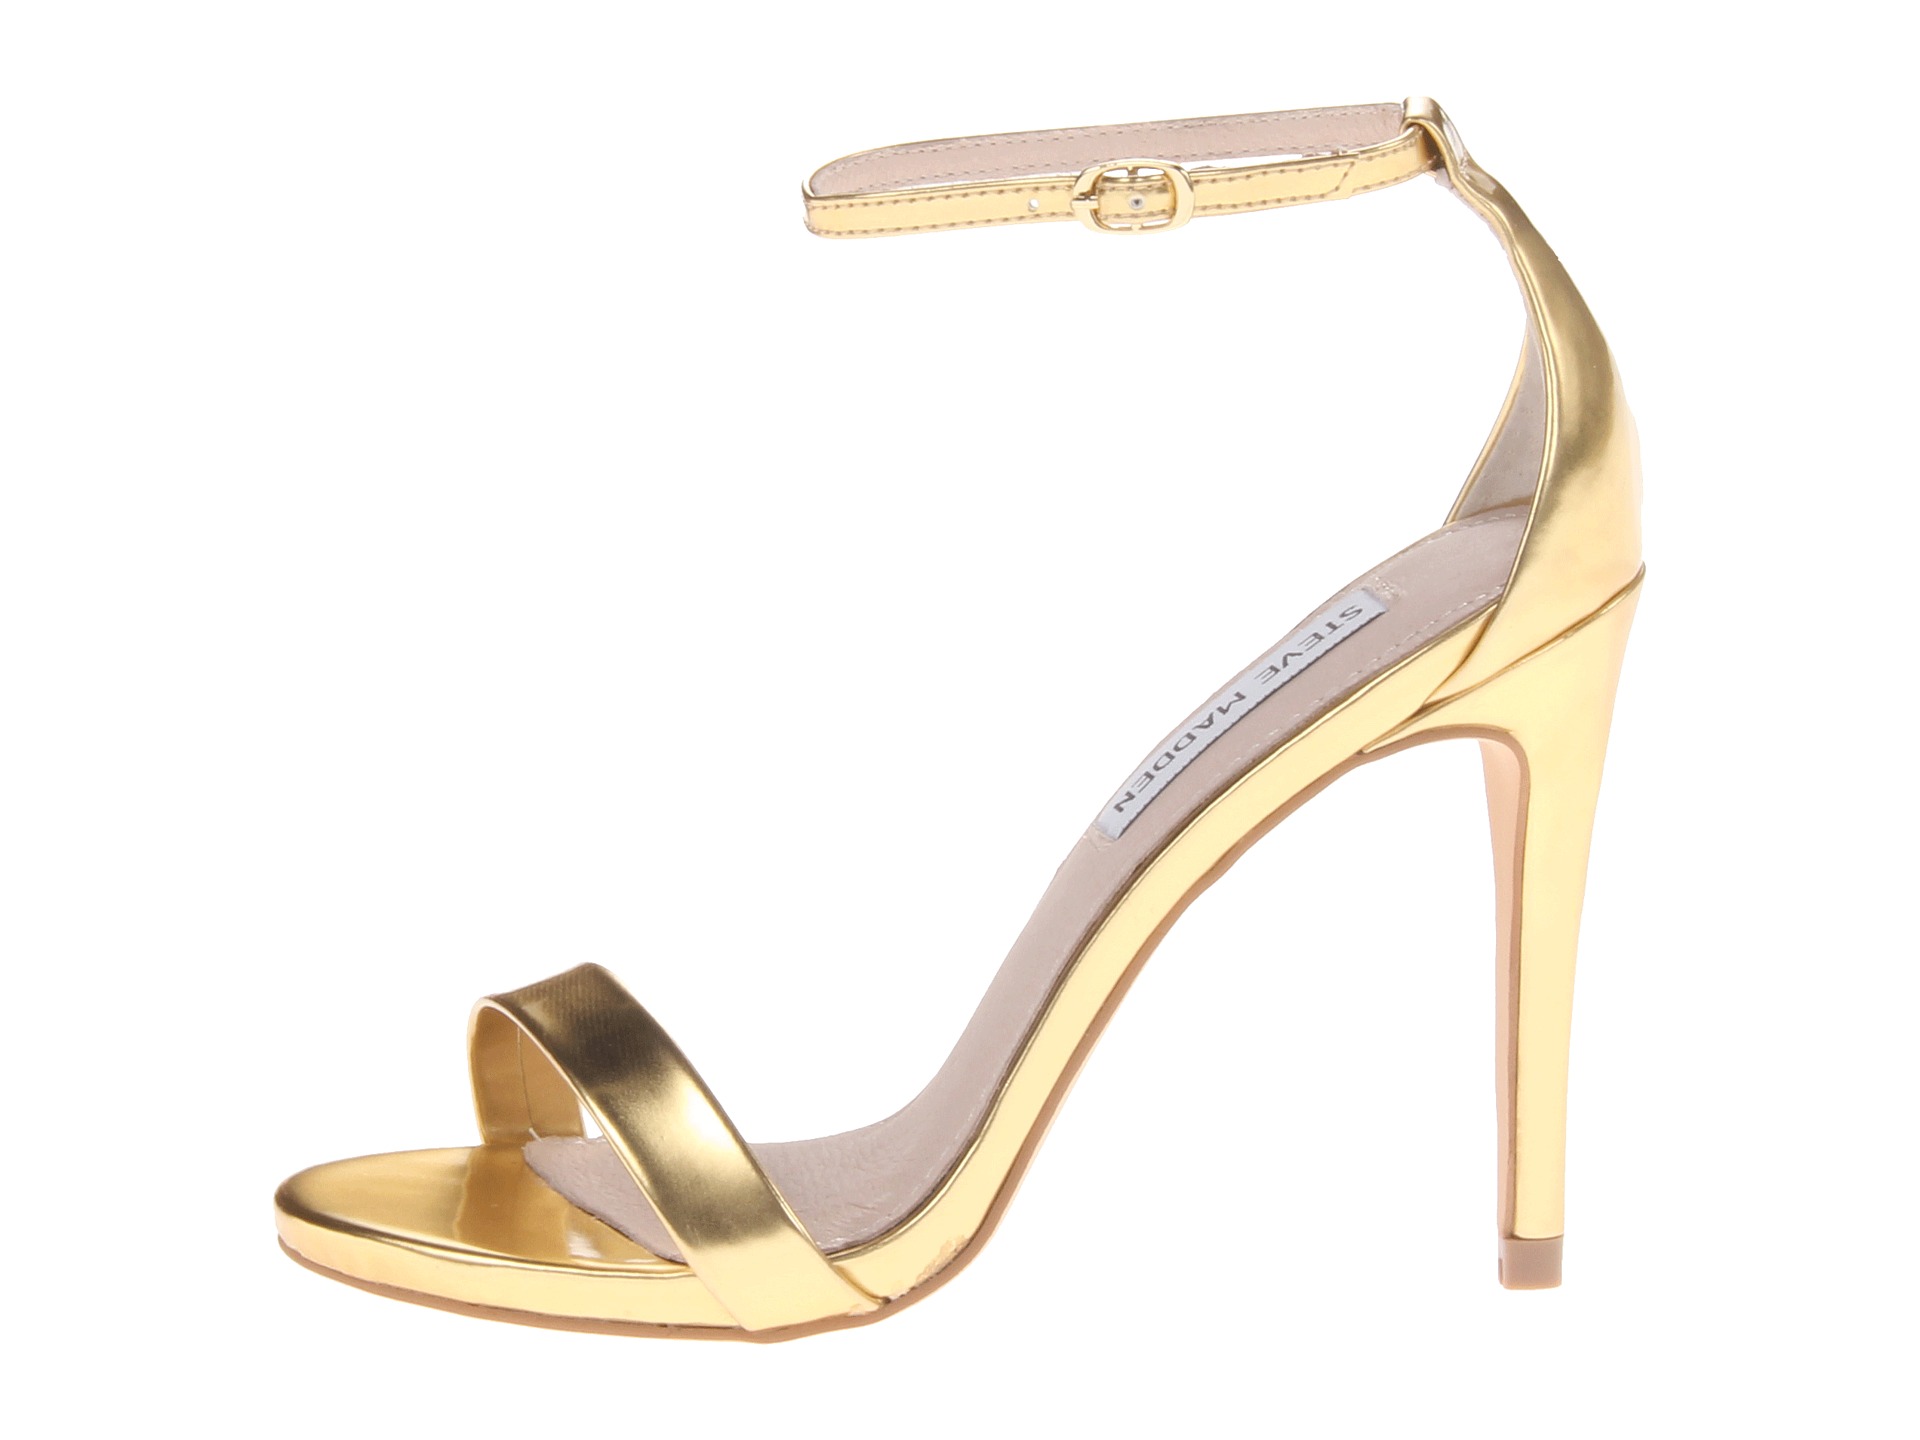 Steve Madden Stecy Gold Foil - Zappos Free Shipping BOTH Ways